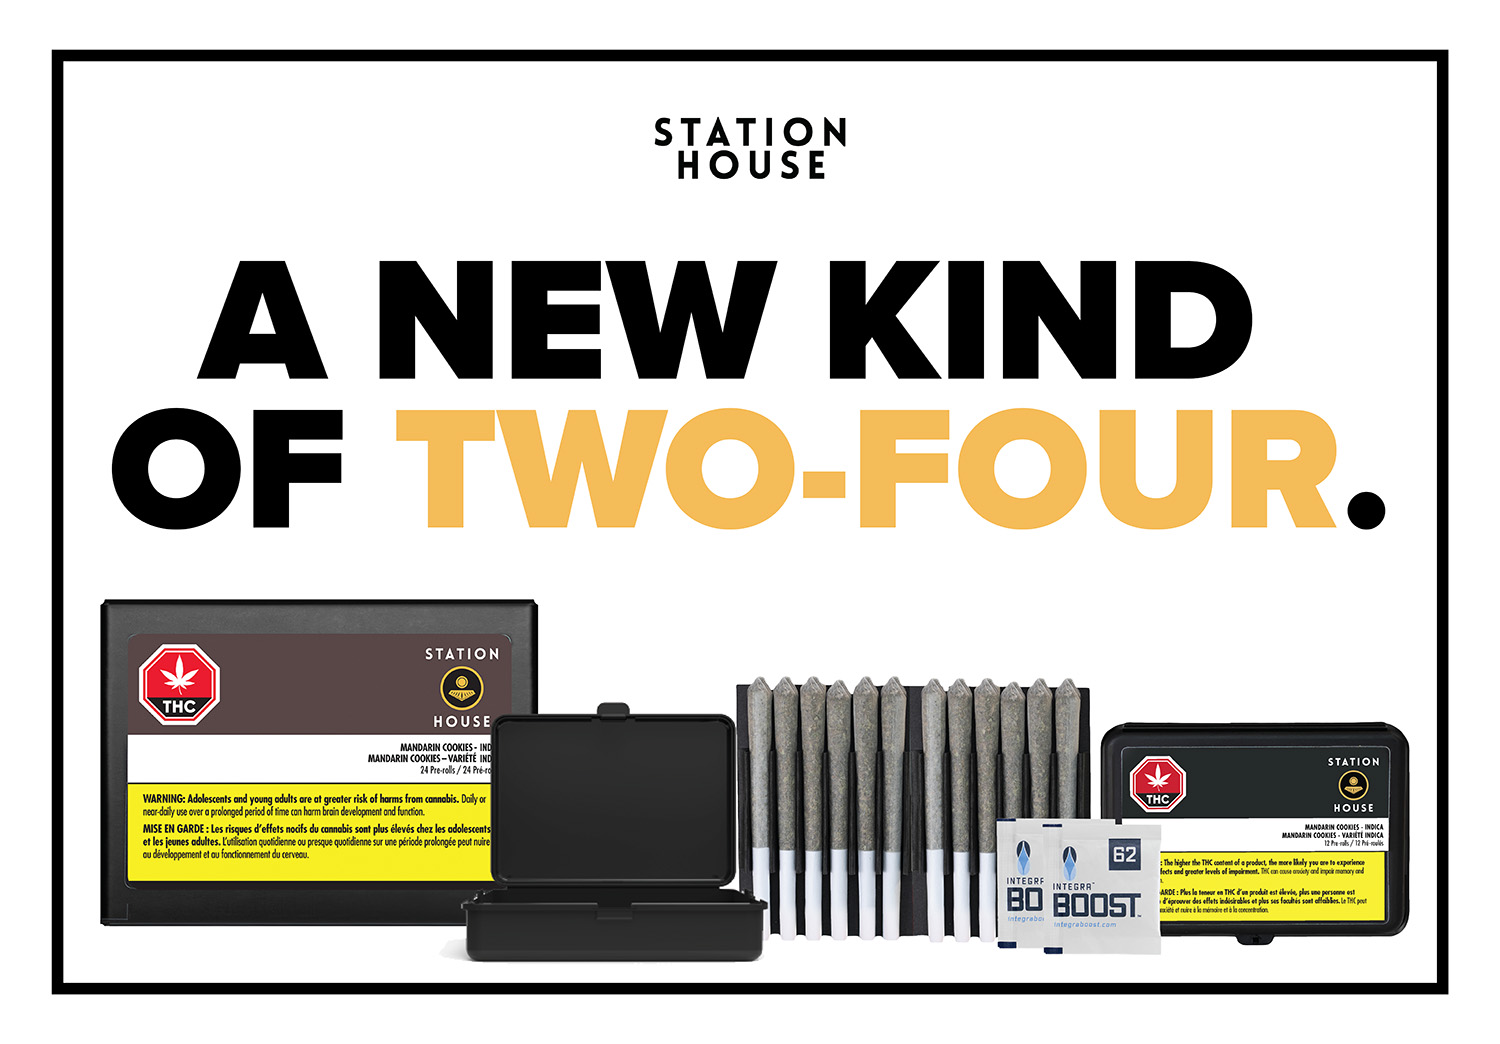 Every 24-pack contains two signature Station House 12-packs in a recyclable paper box. Station House’s signature pre-roll multi-packs include pre-roll trays and humidity devices, inside a travel-friendly hard case to ensure optimal product integrity. 